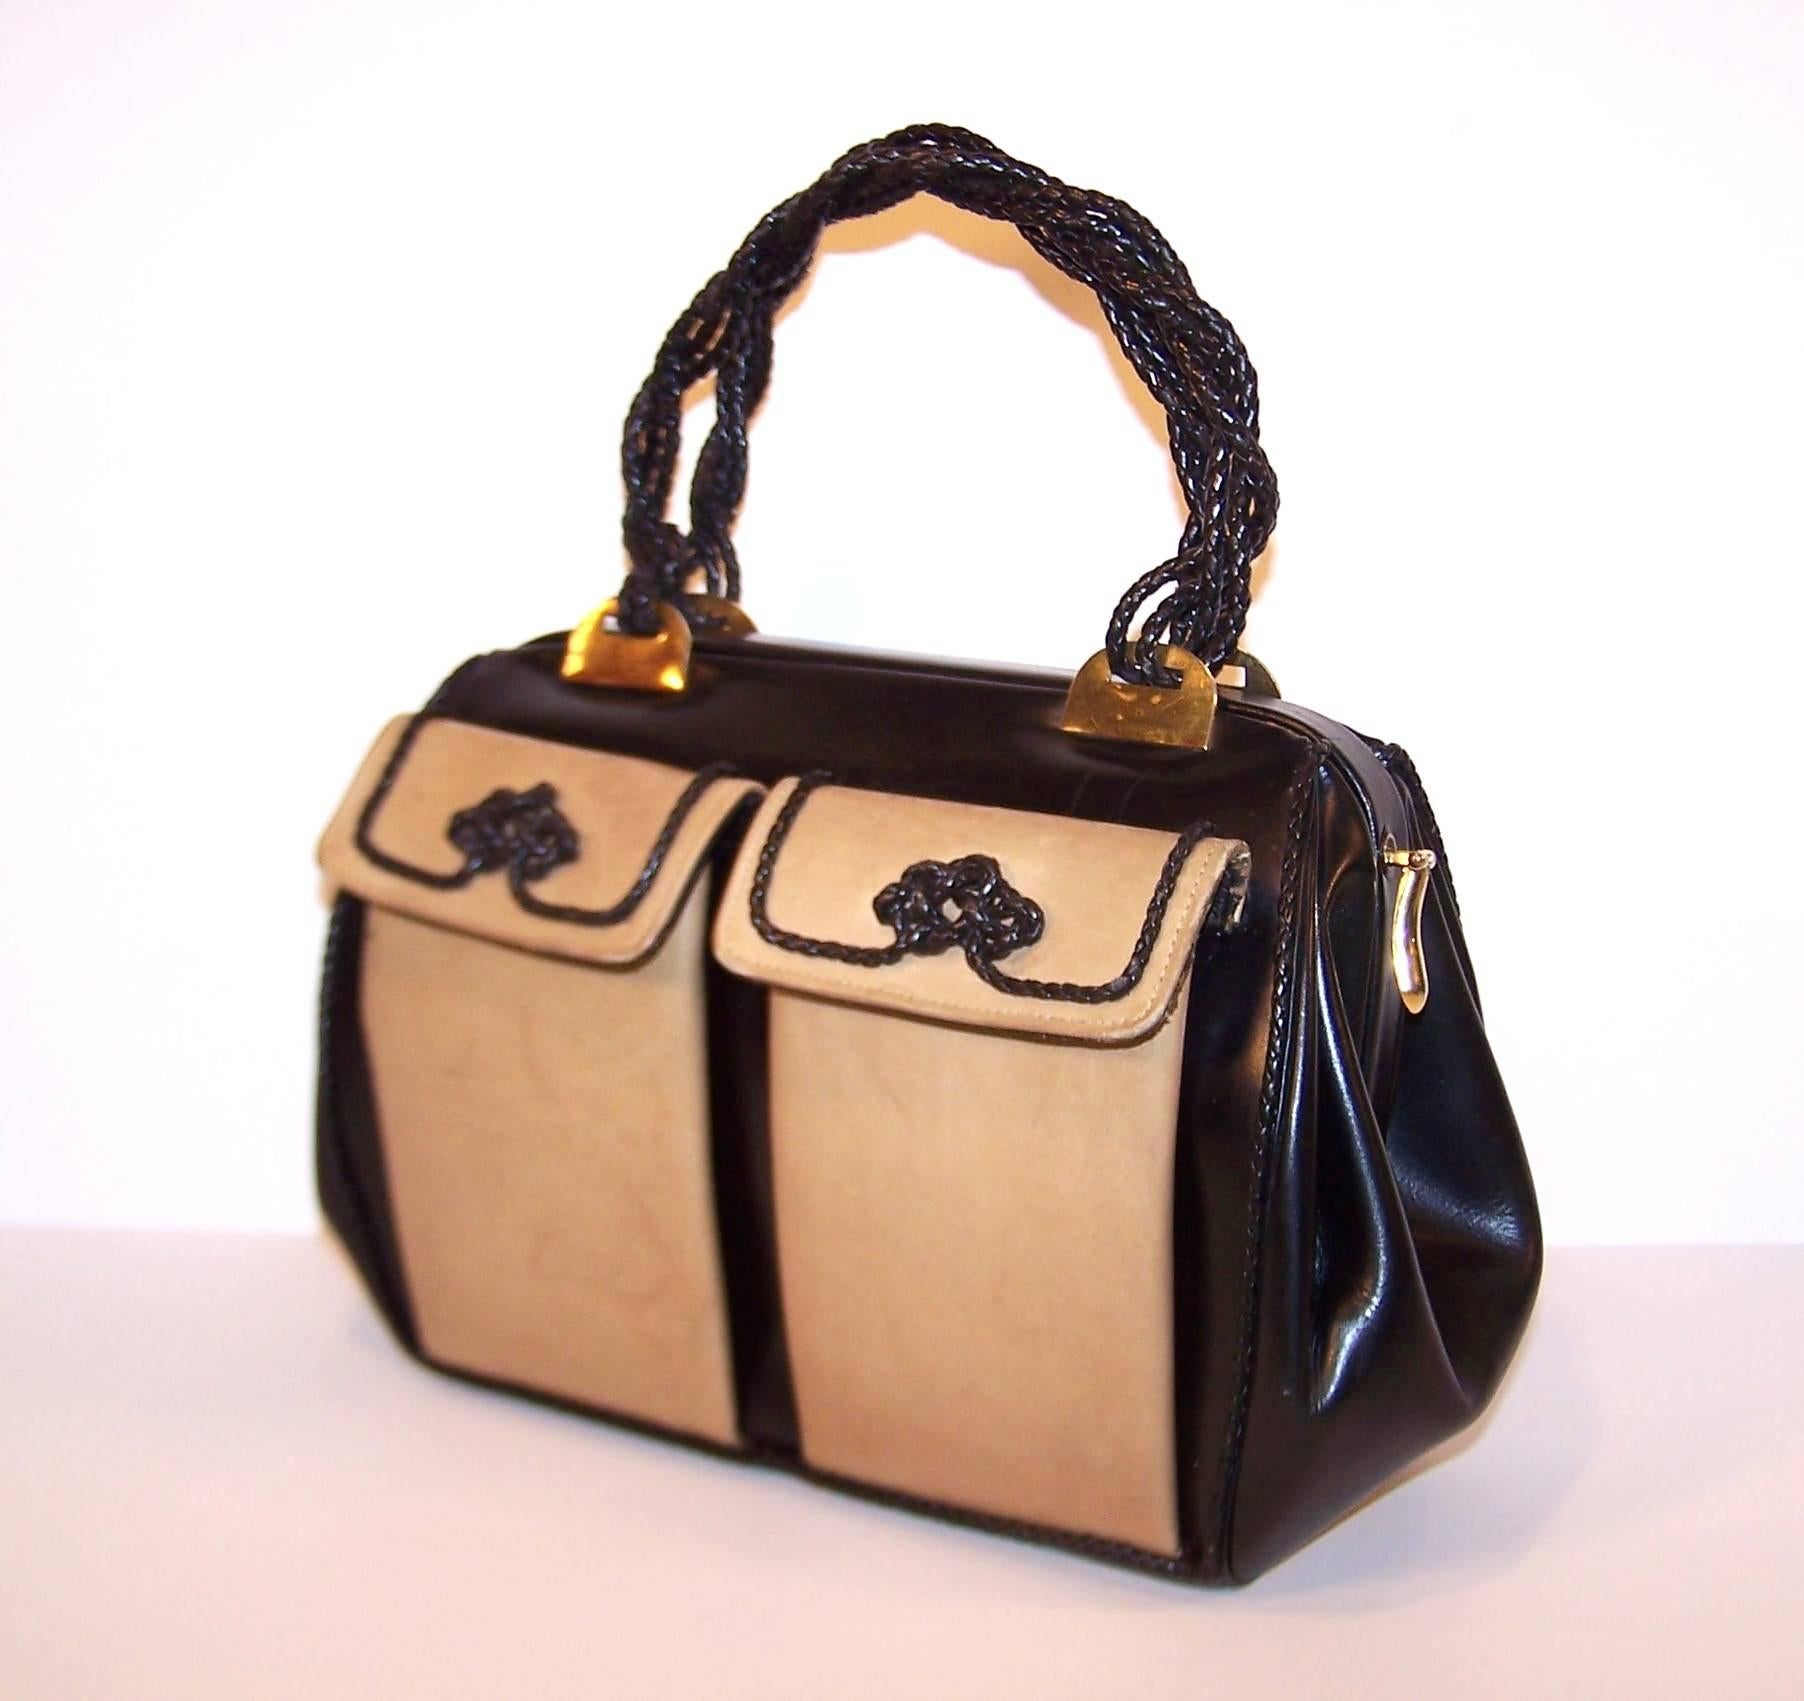 Roberta di Camerino handbags are always unique and innovative.  This handsome example features a two tone leather combination of black and taupe with braided leather trim and handles.  The front pockets snap closed and make a perfect compartment for